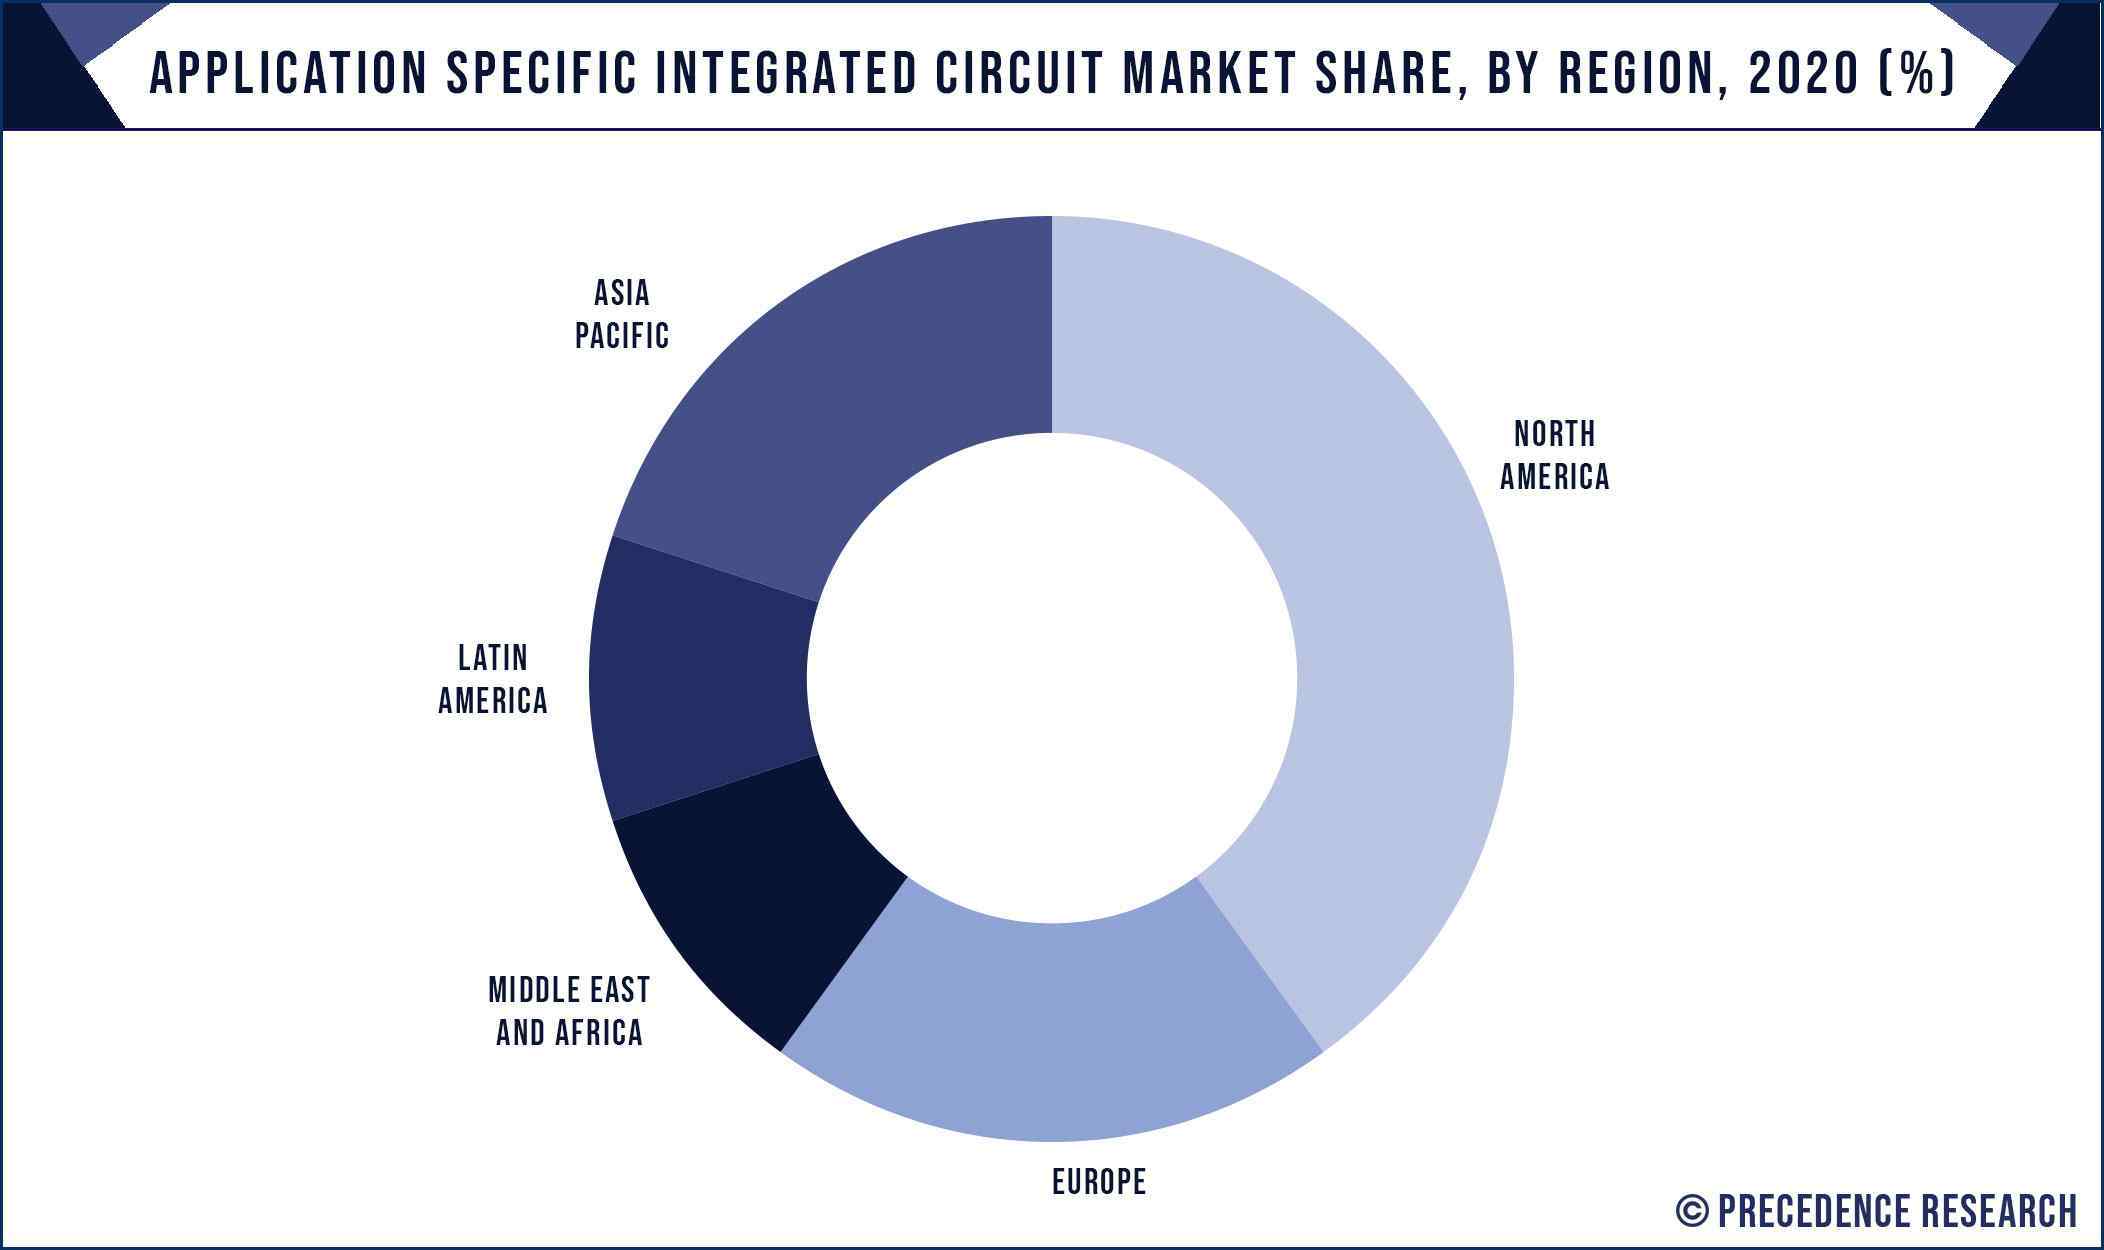 Application Specific Integrated Circuit Market Share, By Region, 2020 (%)